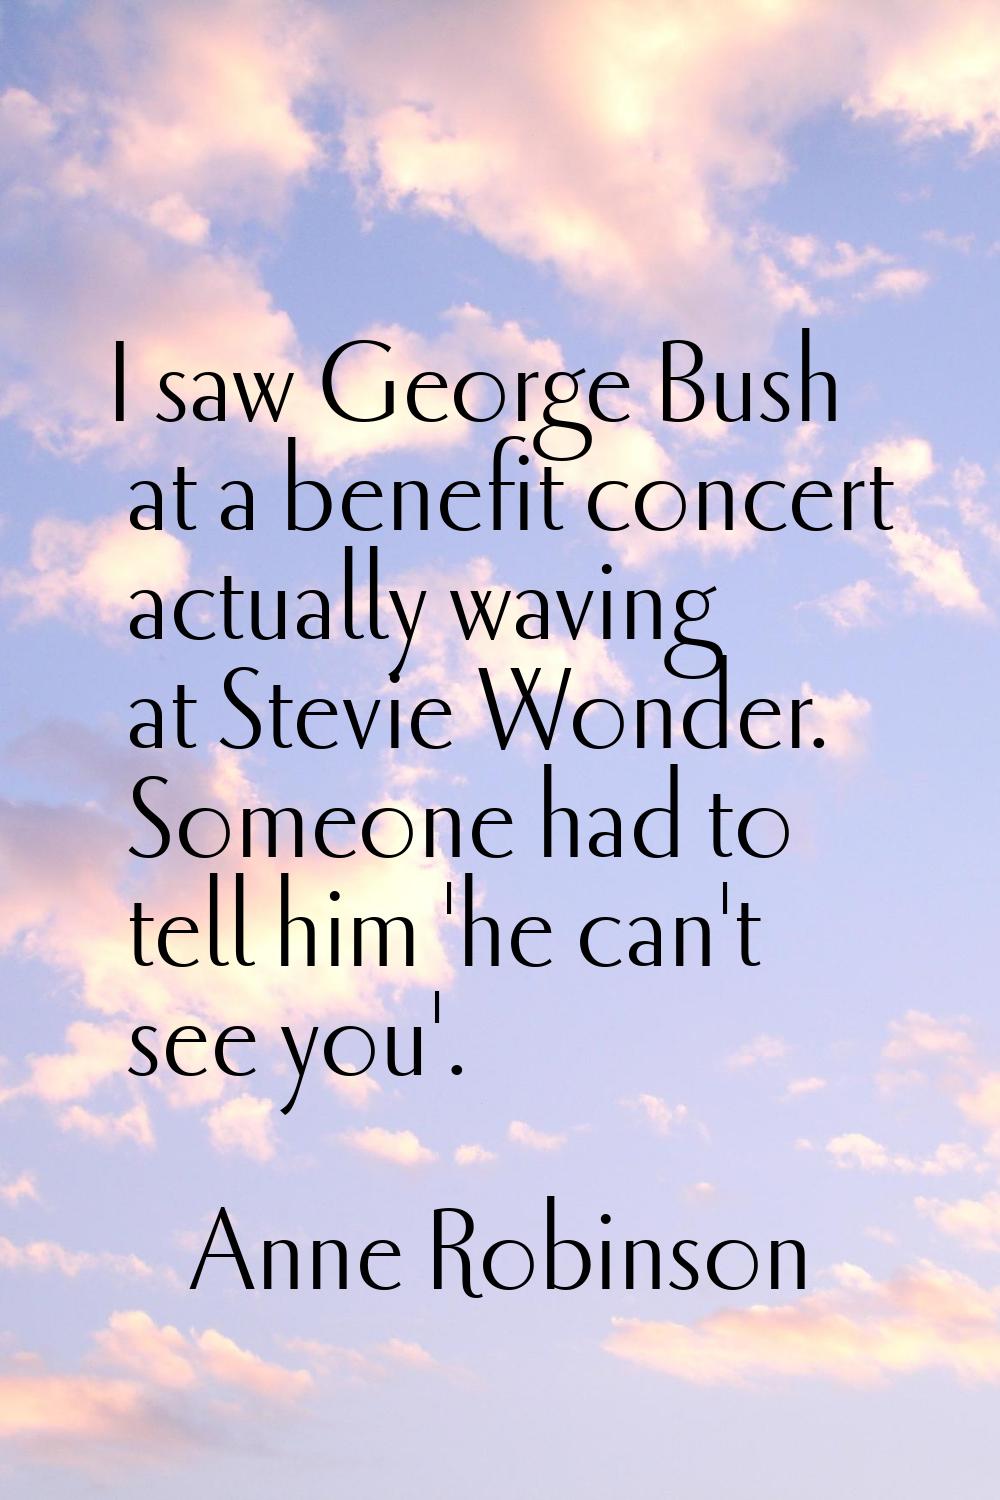 I saw George Bush at a benefit concert actually waving at Stevie Wonder. Someone had to tell him 'h